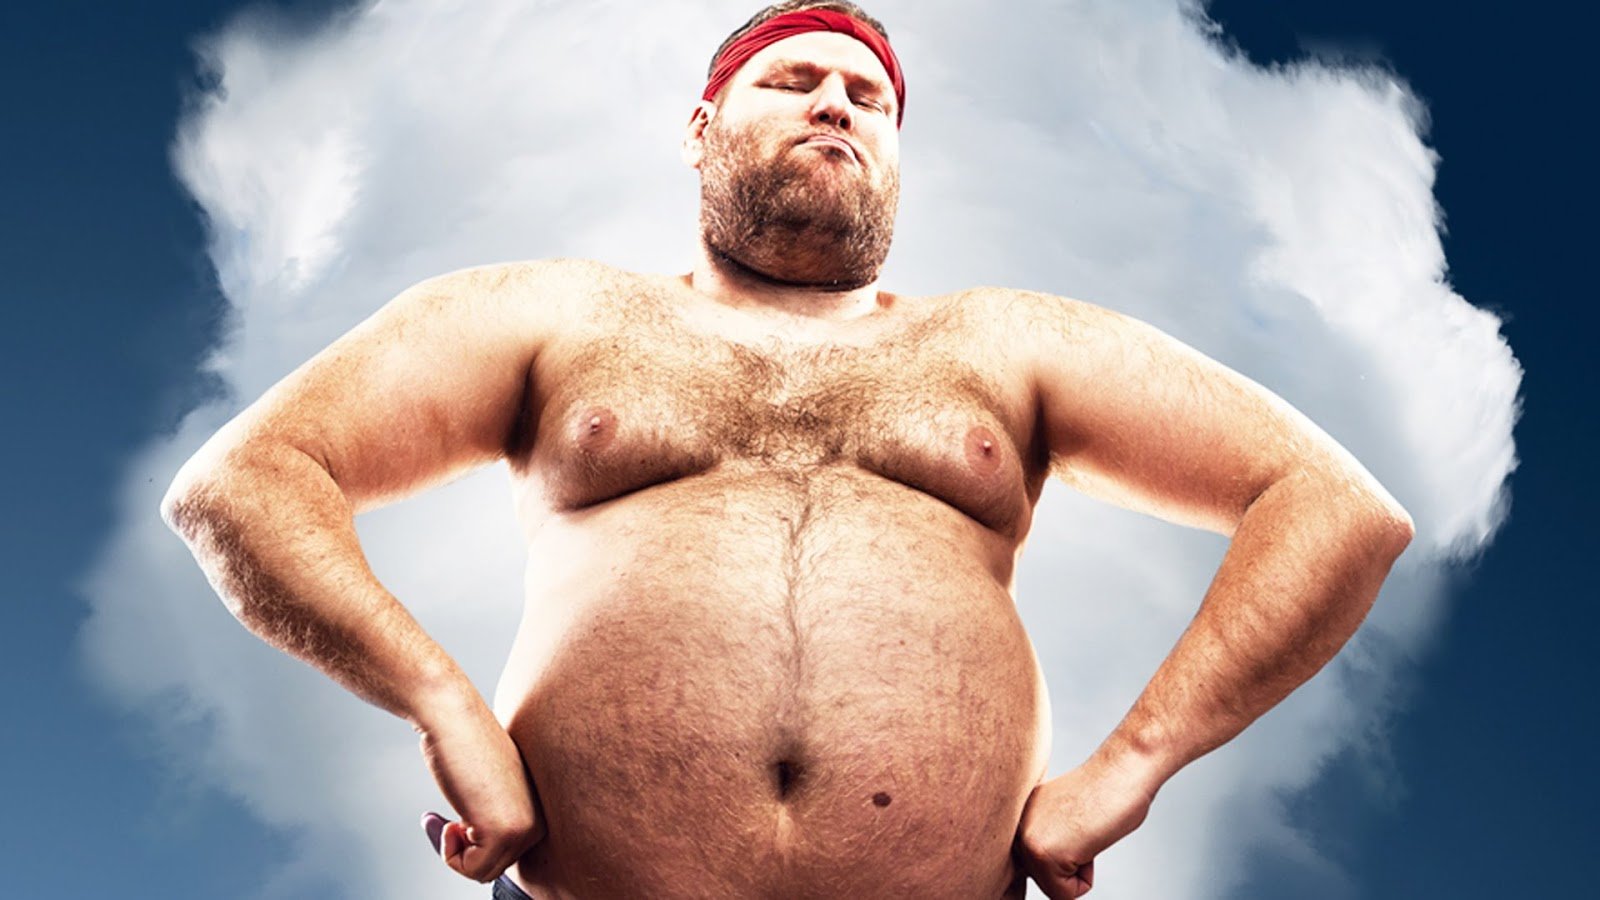 Tons of awesome fat men wallpapers to download for free. 